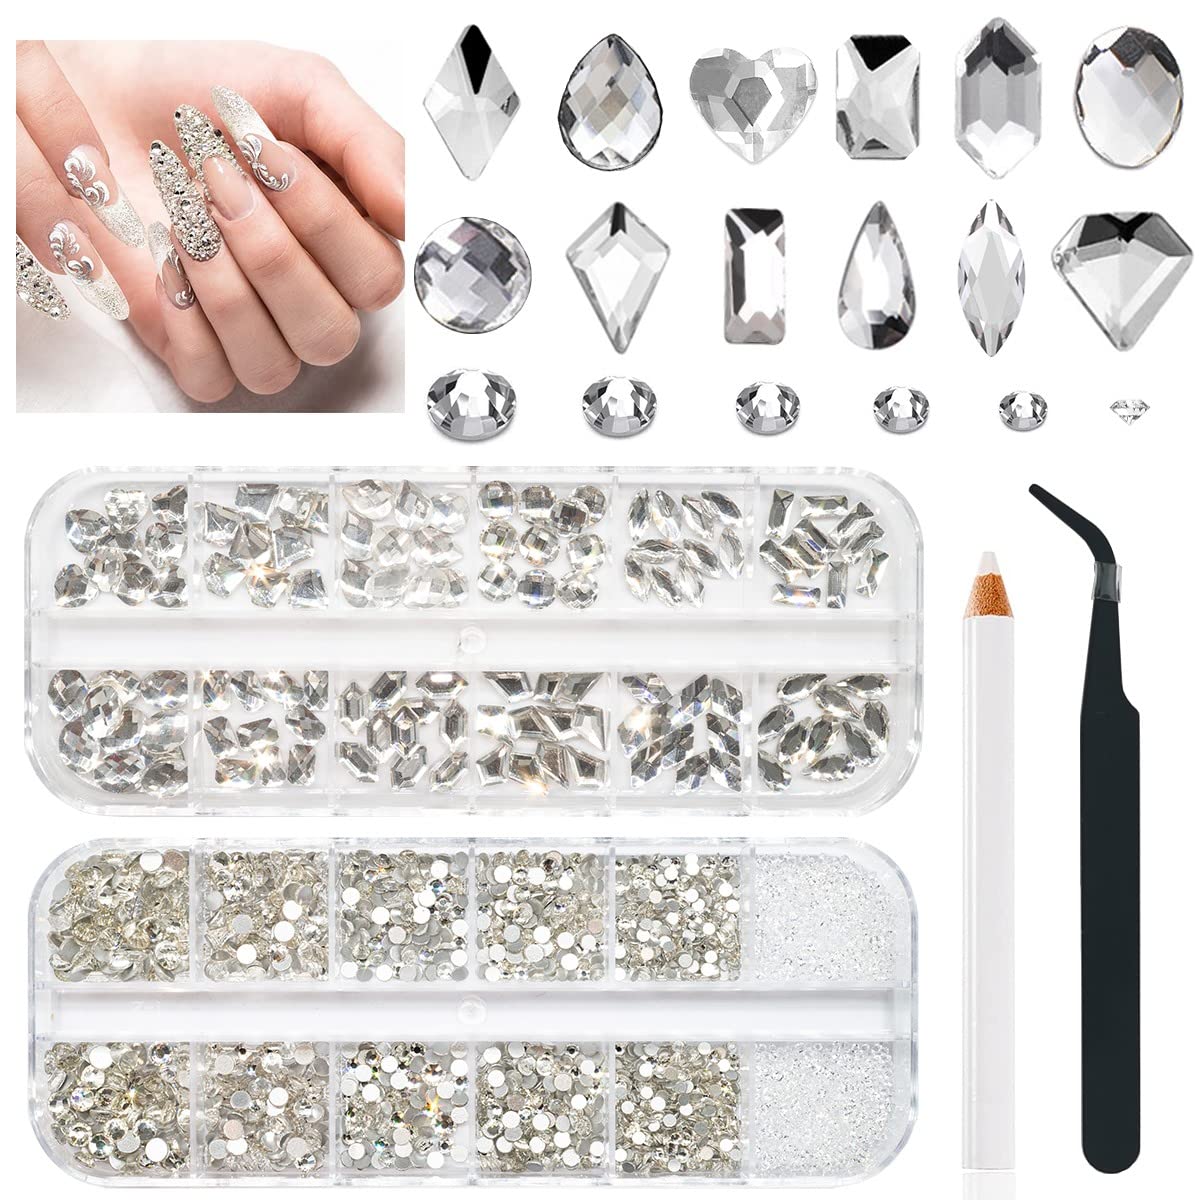 Rhinestones Etc - Rhinestones for Clothing in Stock and Ready to Ship Today